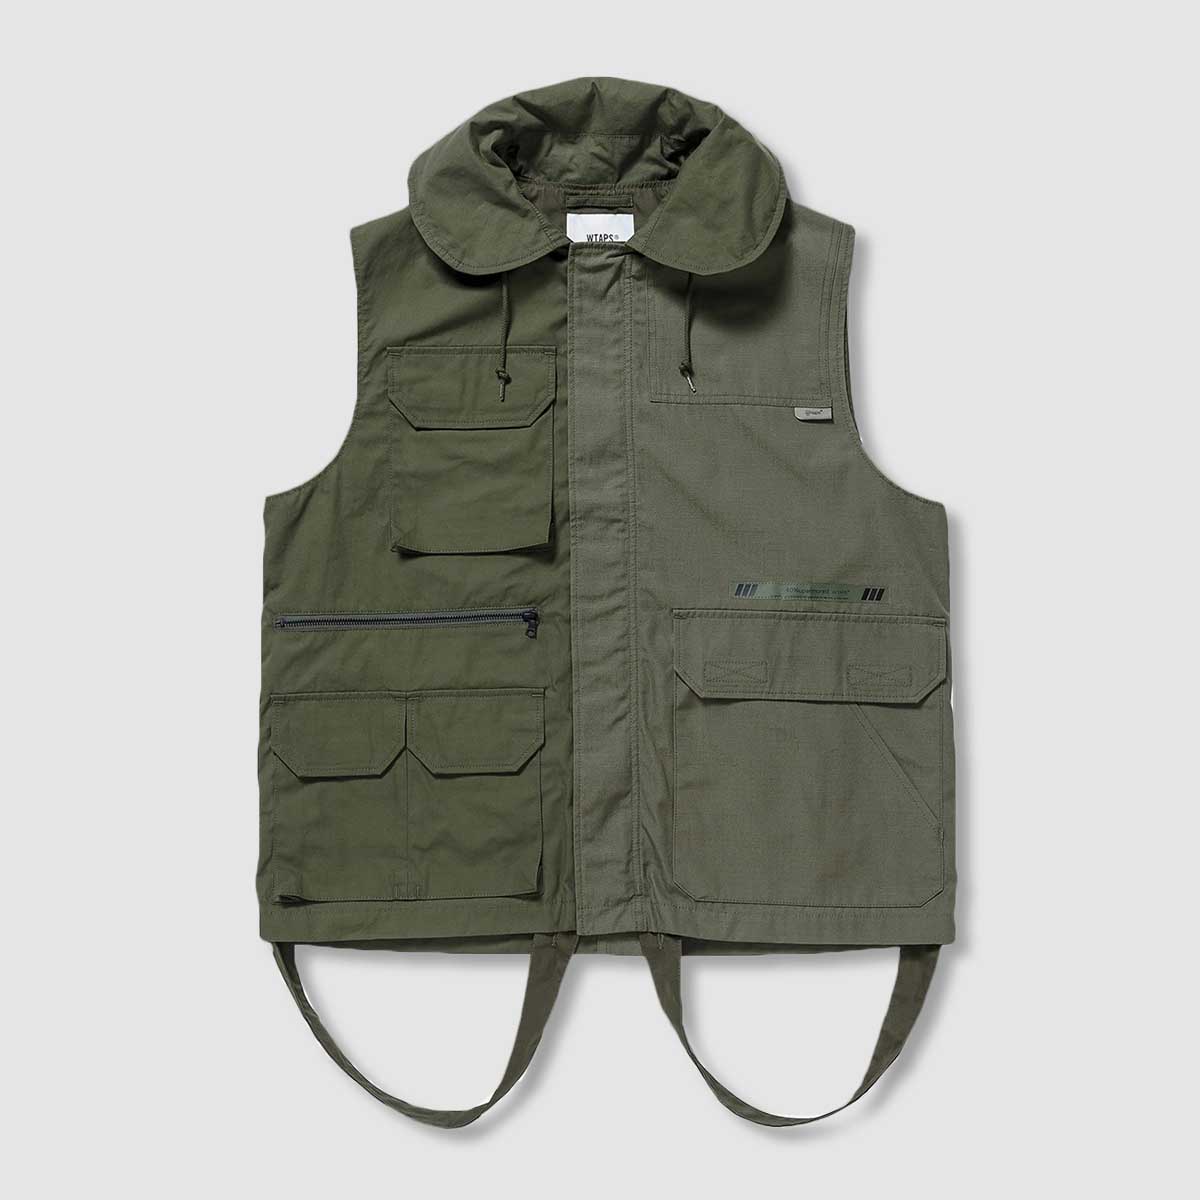 INVINCIBLE - TRADER / VEST / COTTON. WEATHER. RIPSTOP